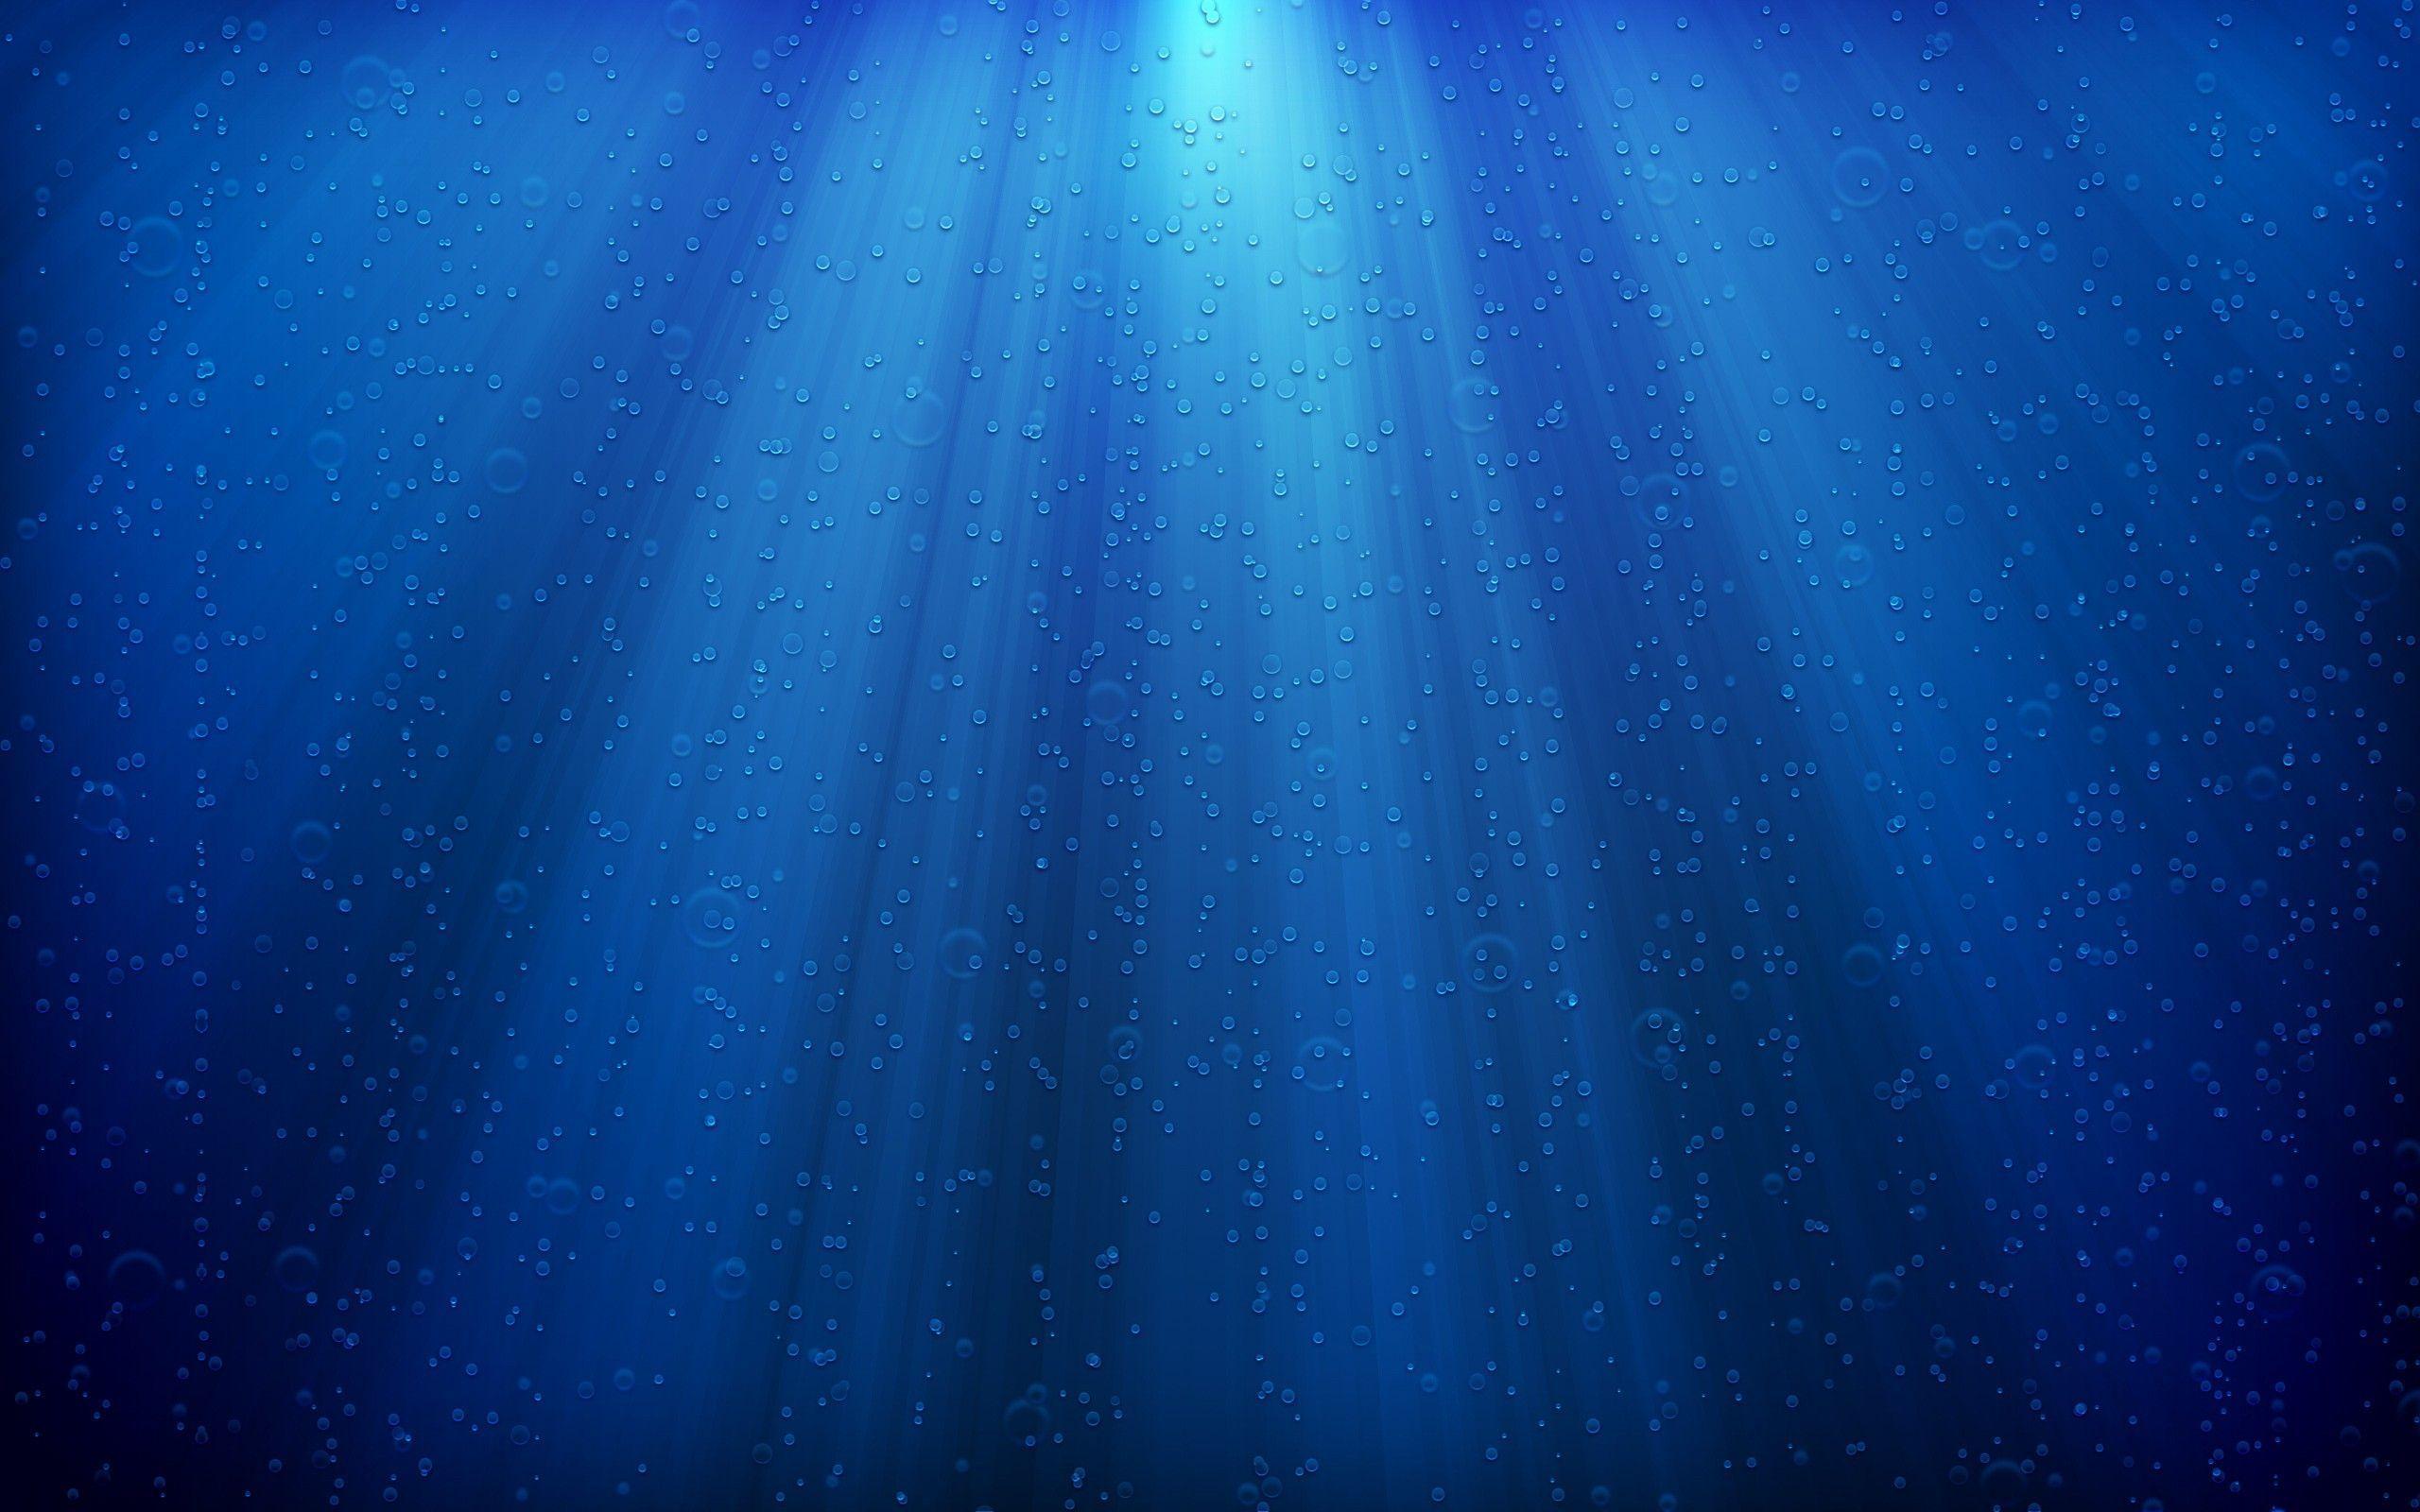 The Image of Light Abstract Blue Water Drops 2560x1600 HD